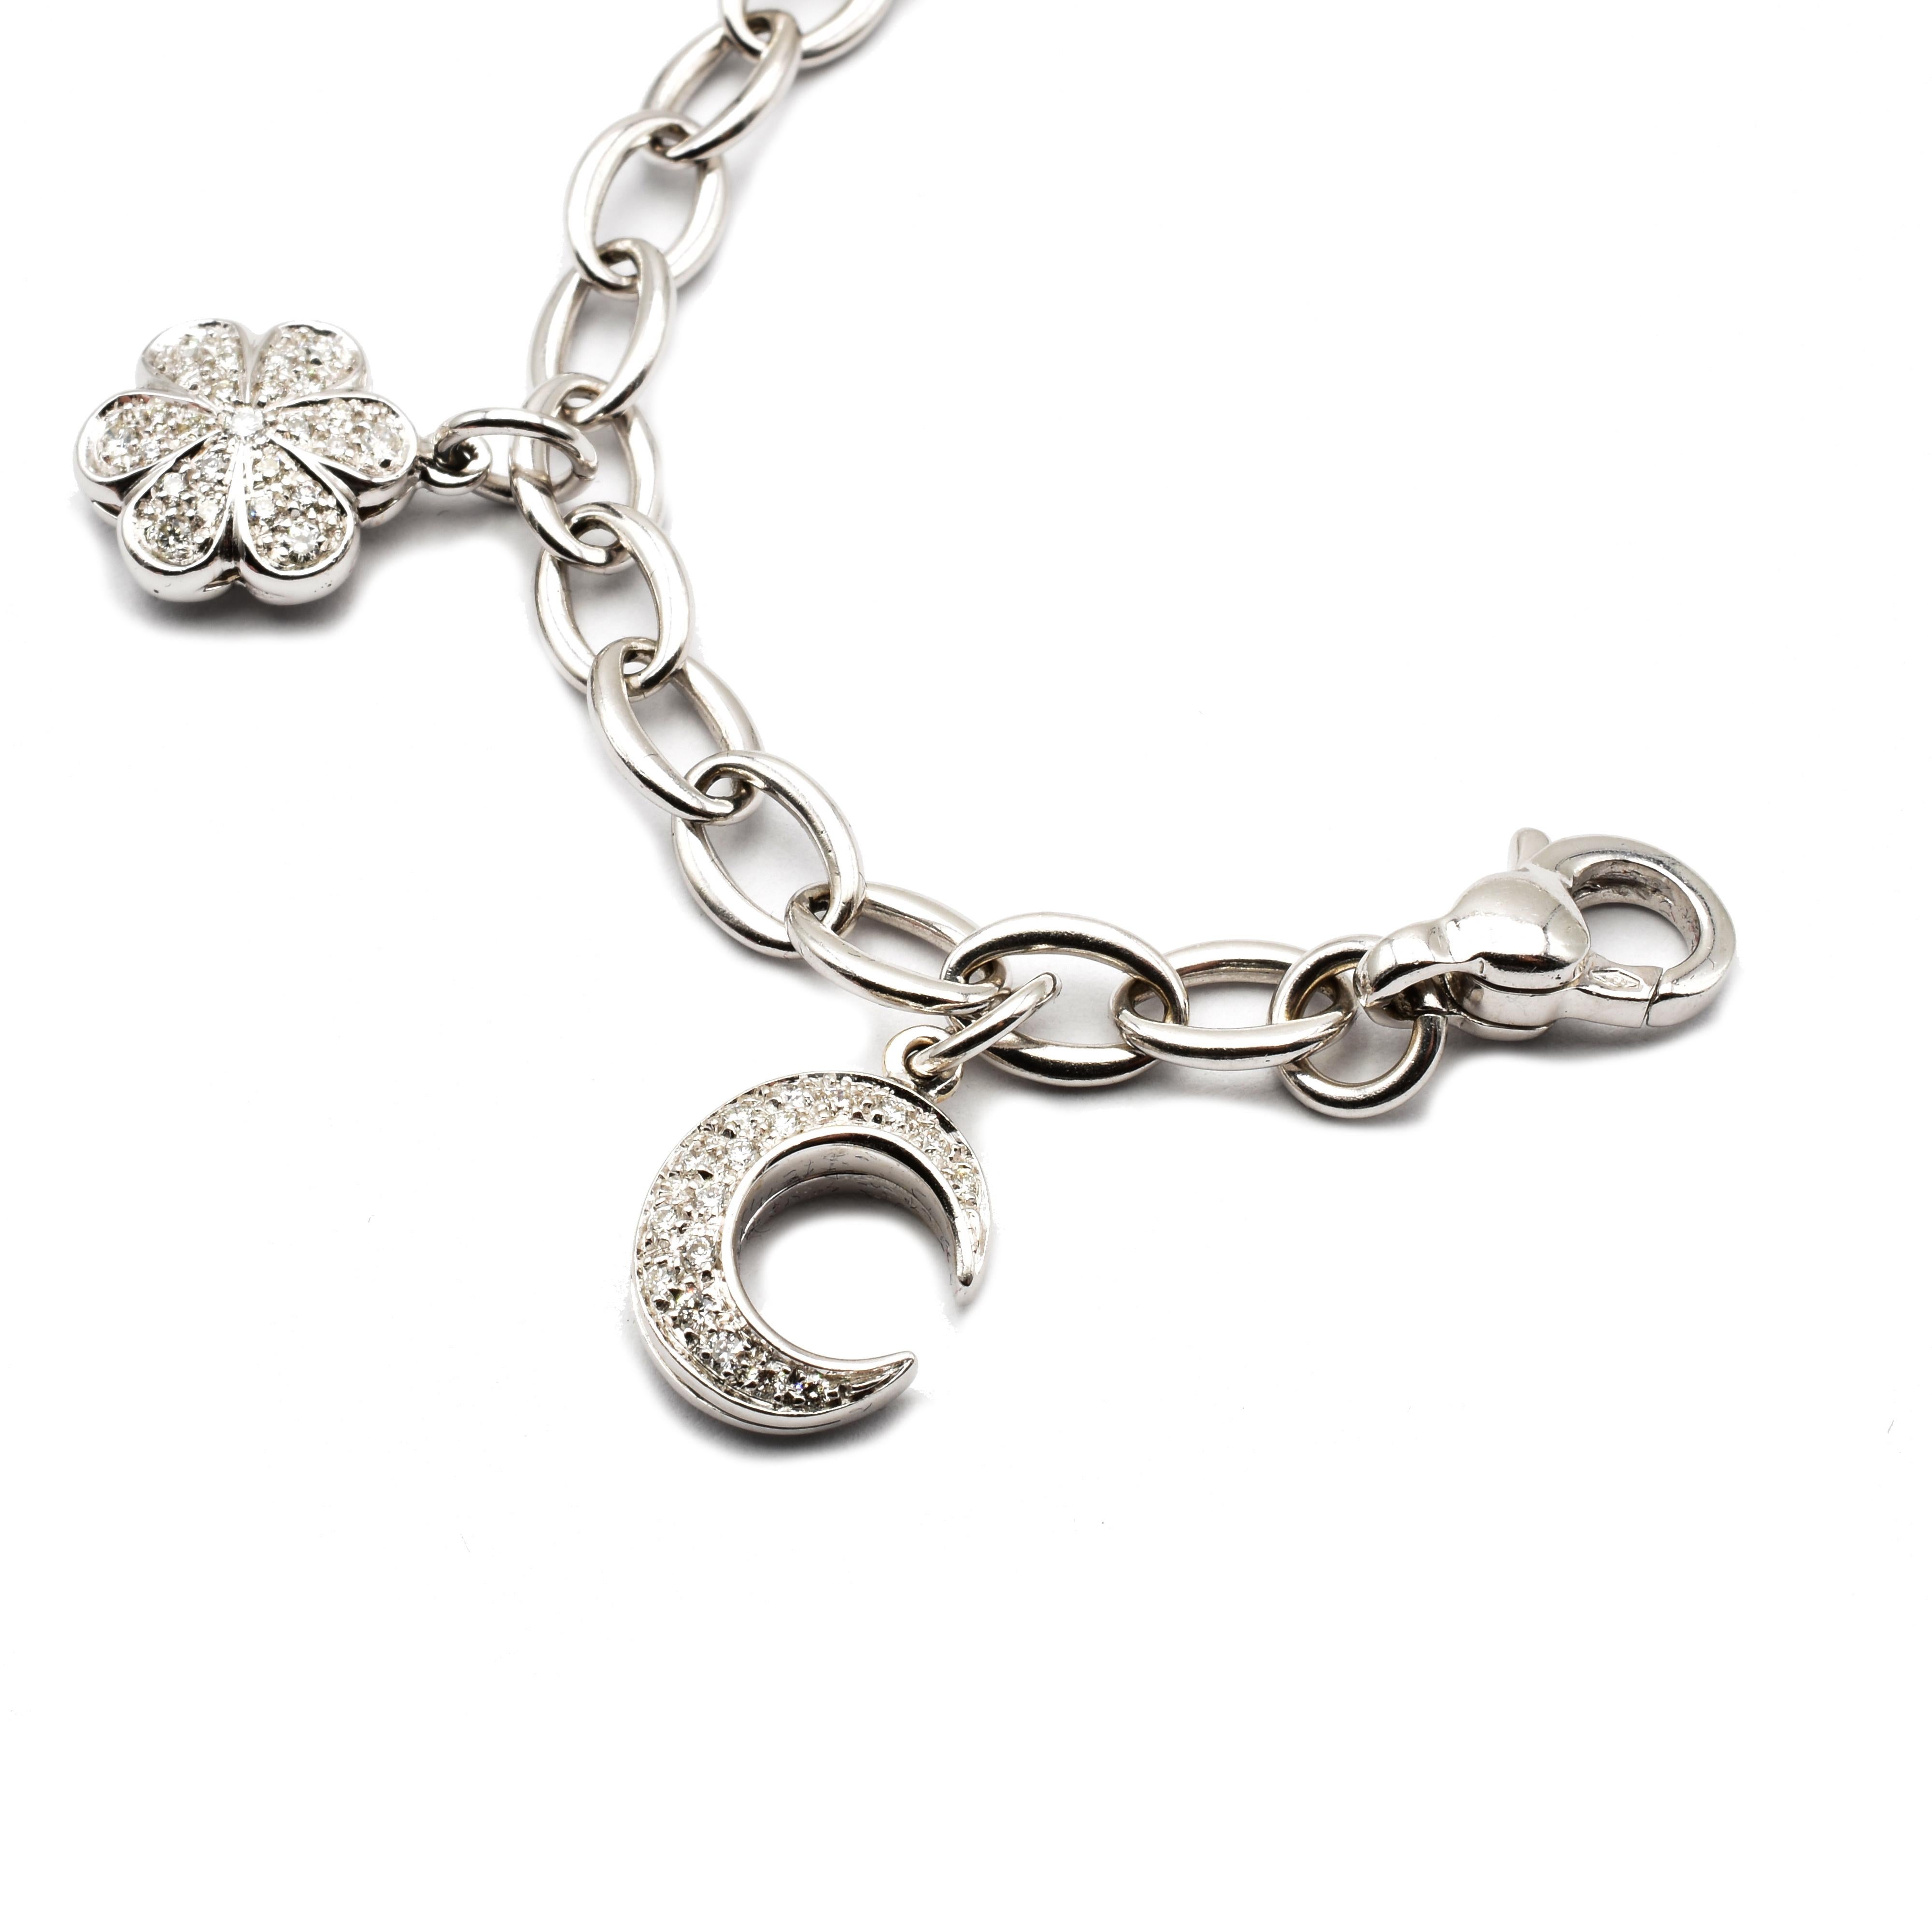 Contemporary Diamond White Gold Charms Bracelet, Made in Italy For Sale